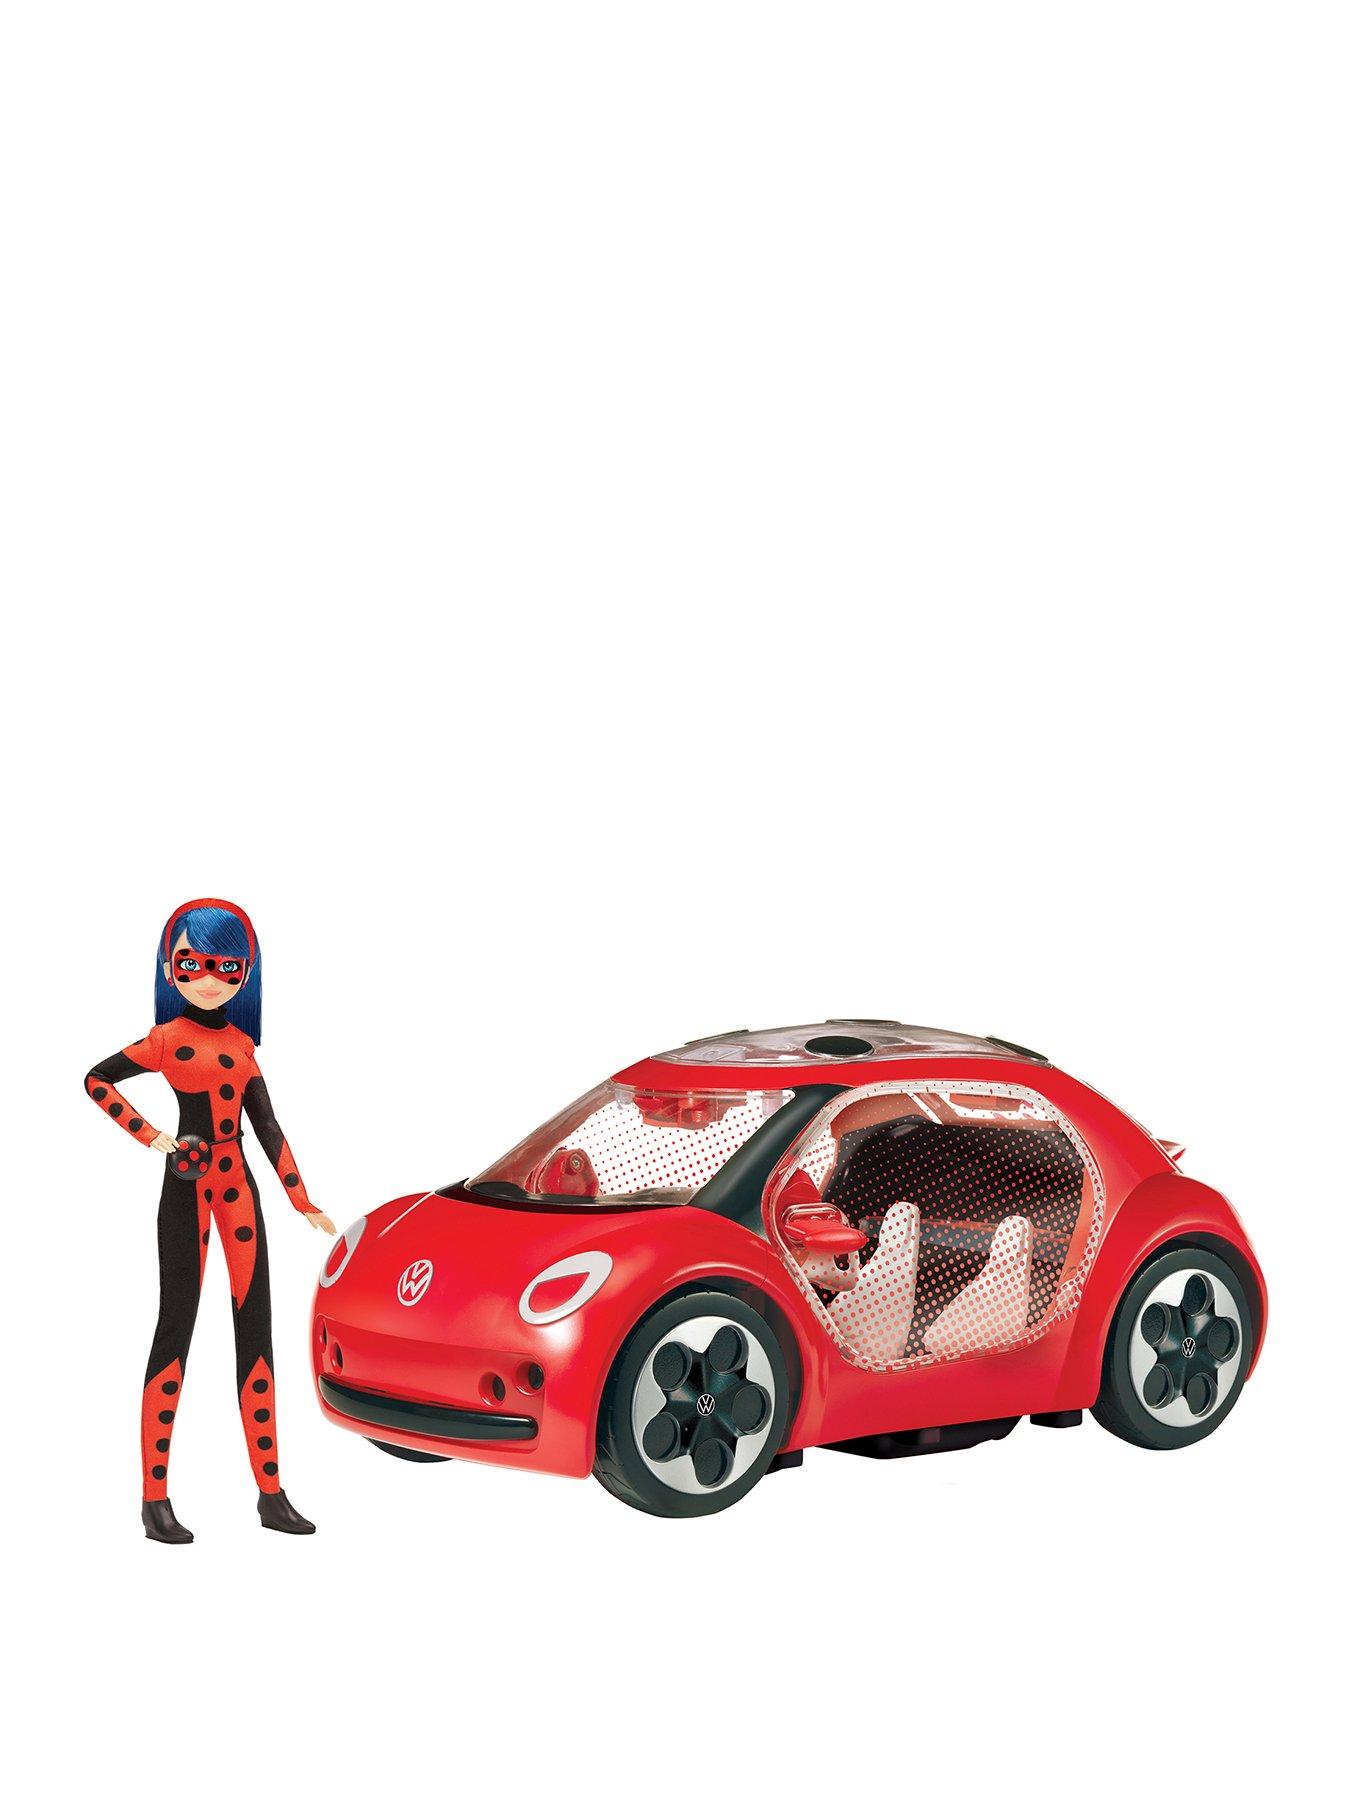 Miraculous Ladybug and Cat Noir Toys Multimouse Fashion Doll